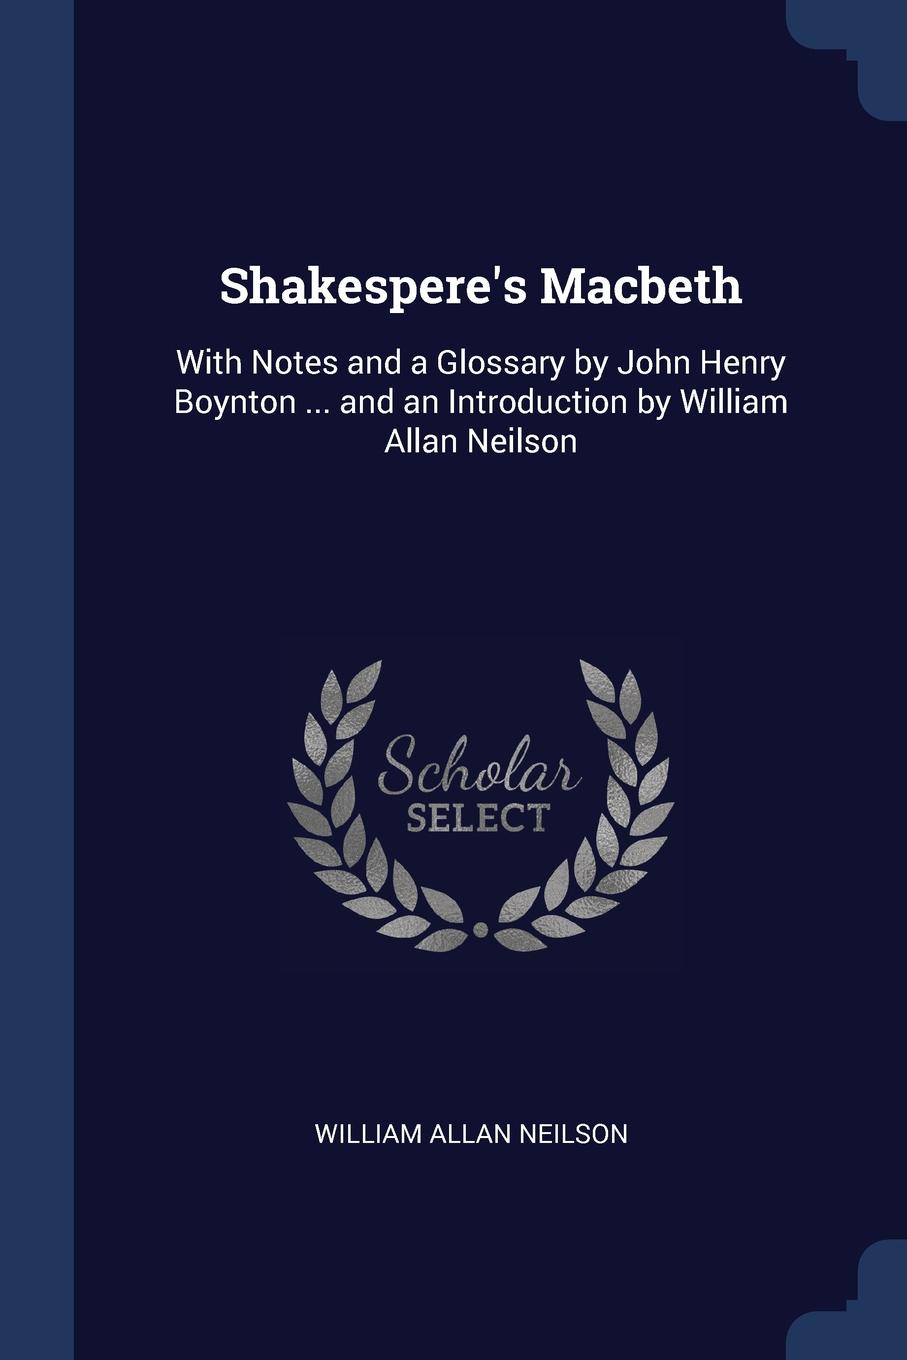 Shakespere.s Macbeth. With Notes and a Glossary by John Henry Boynton ... and an Introduction by William Allan Neilson